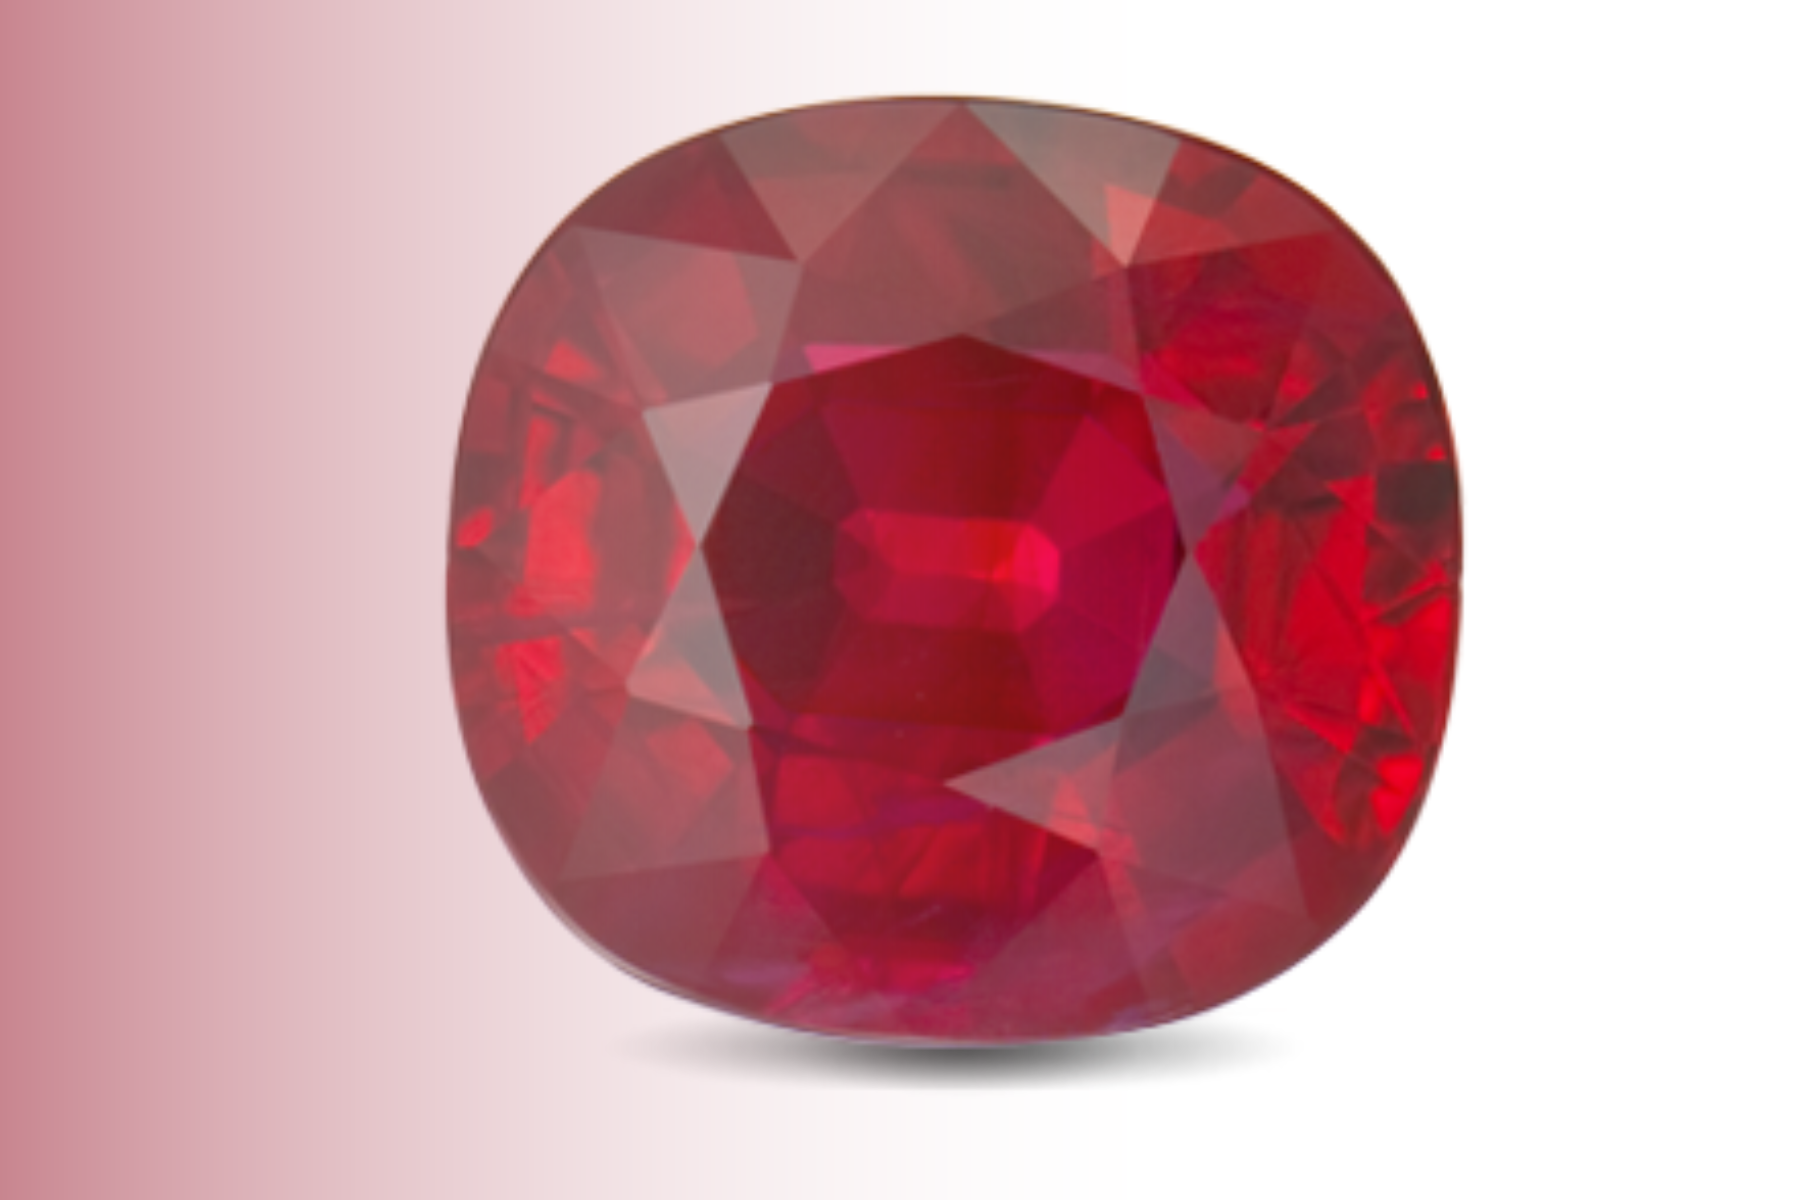 Square ruby stone with smooth corners